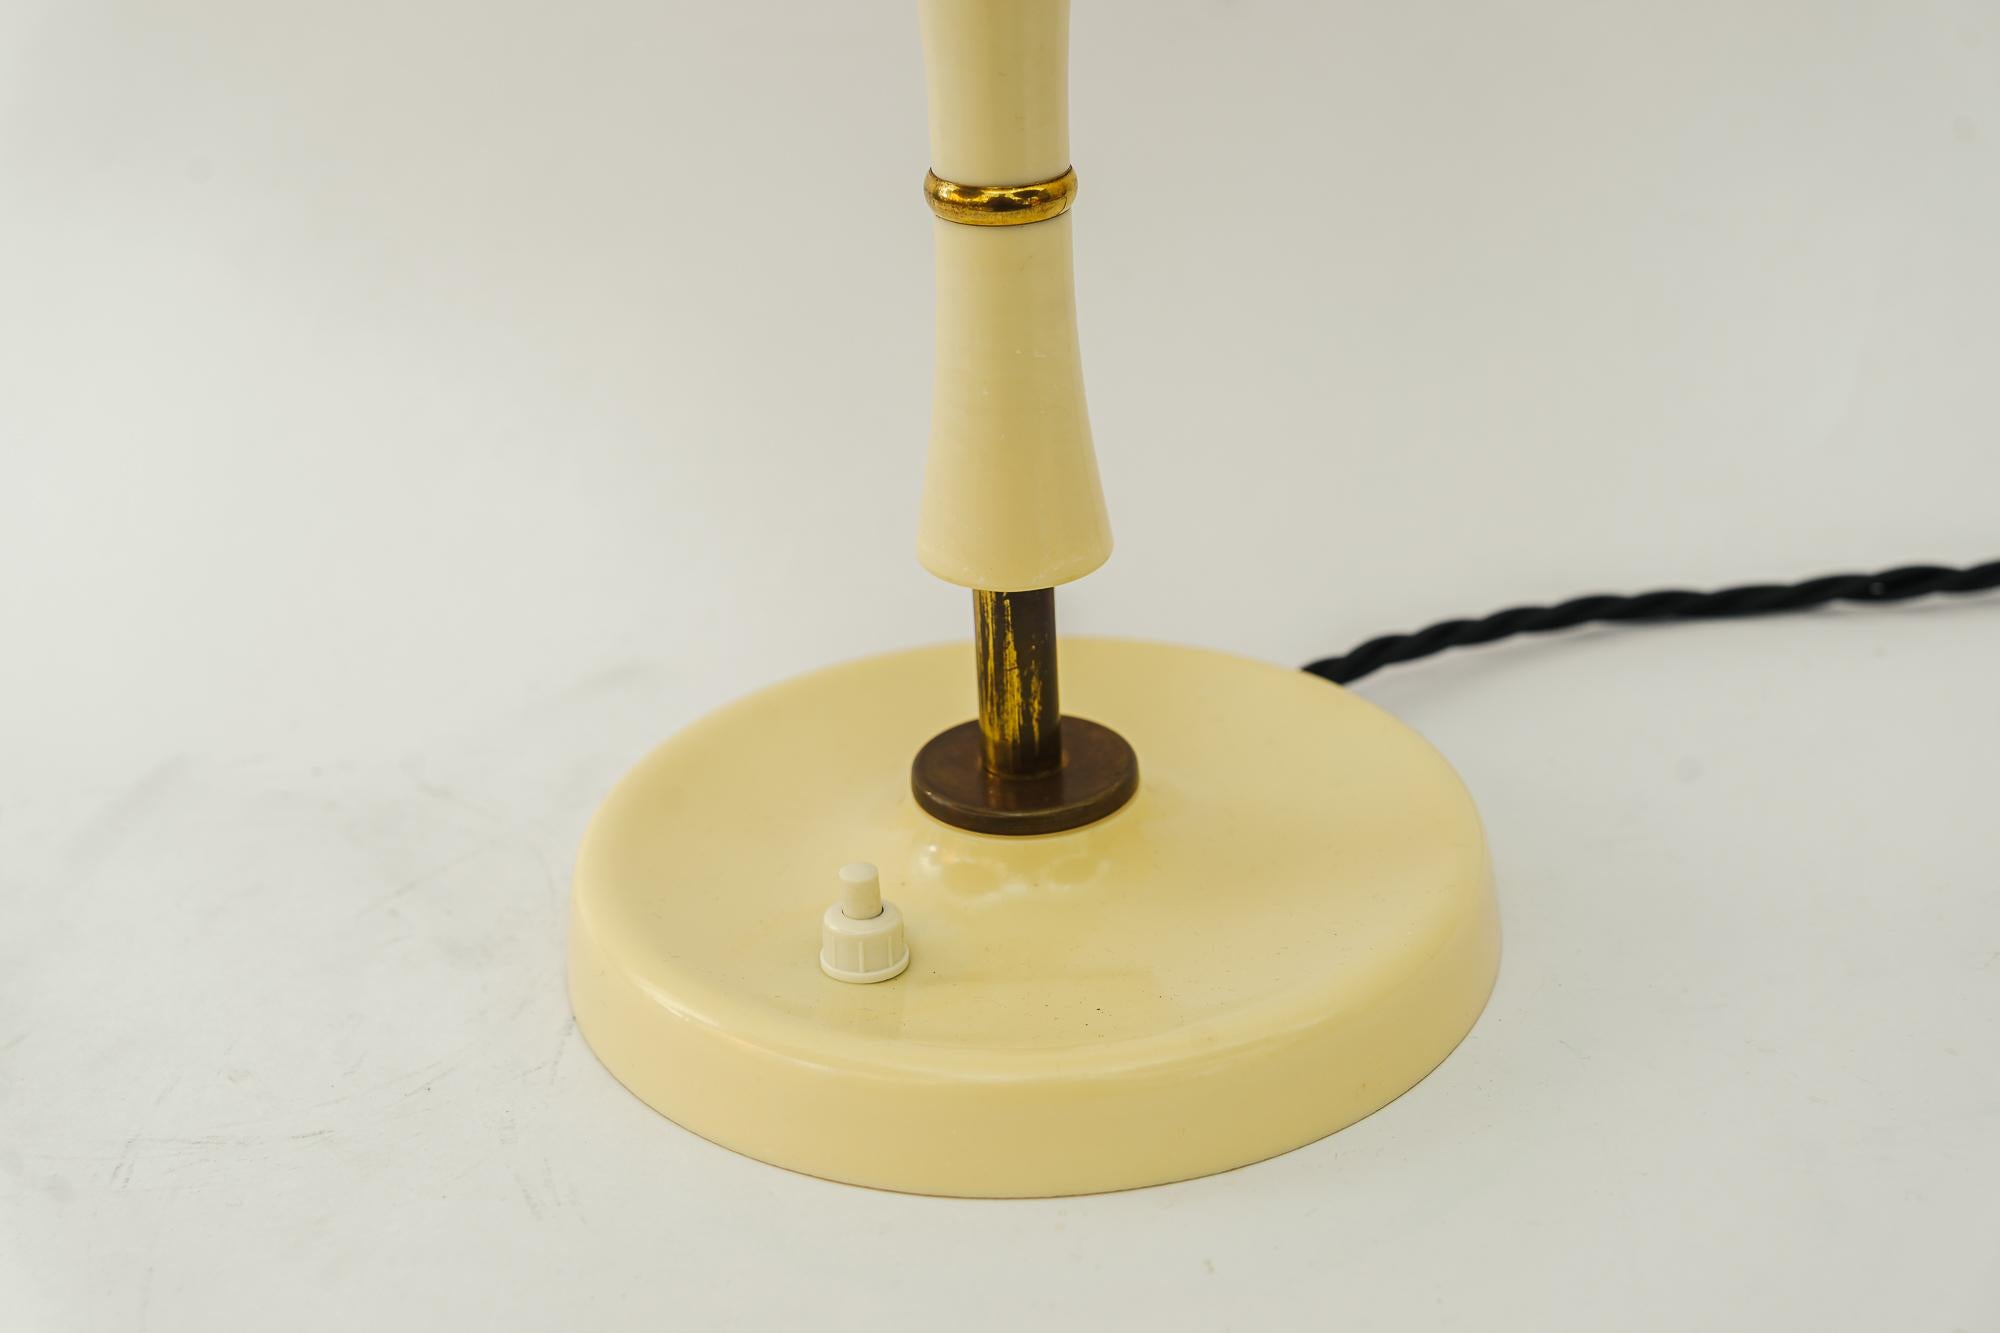 Bakelite table lamp vienna with fabric shade around 1930s.
Original condition.
Only the fabric shade is replaced.